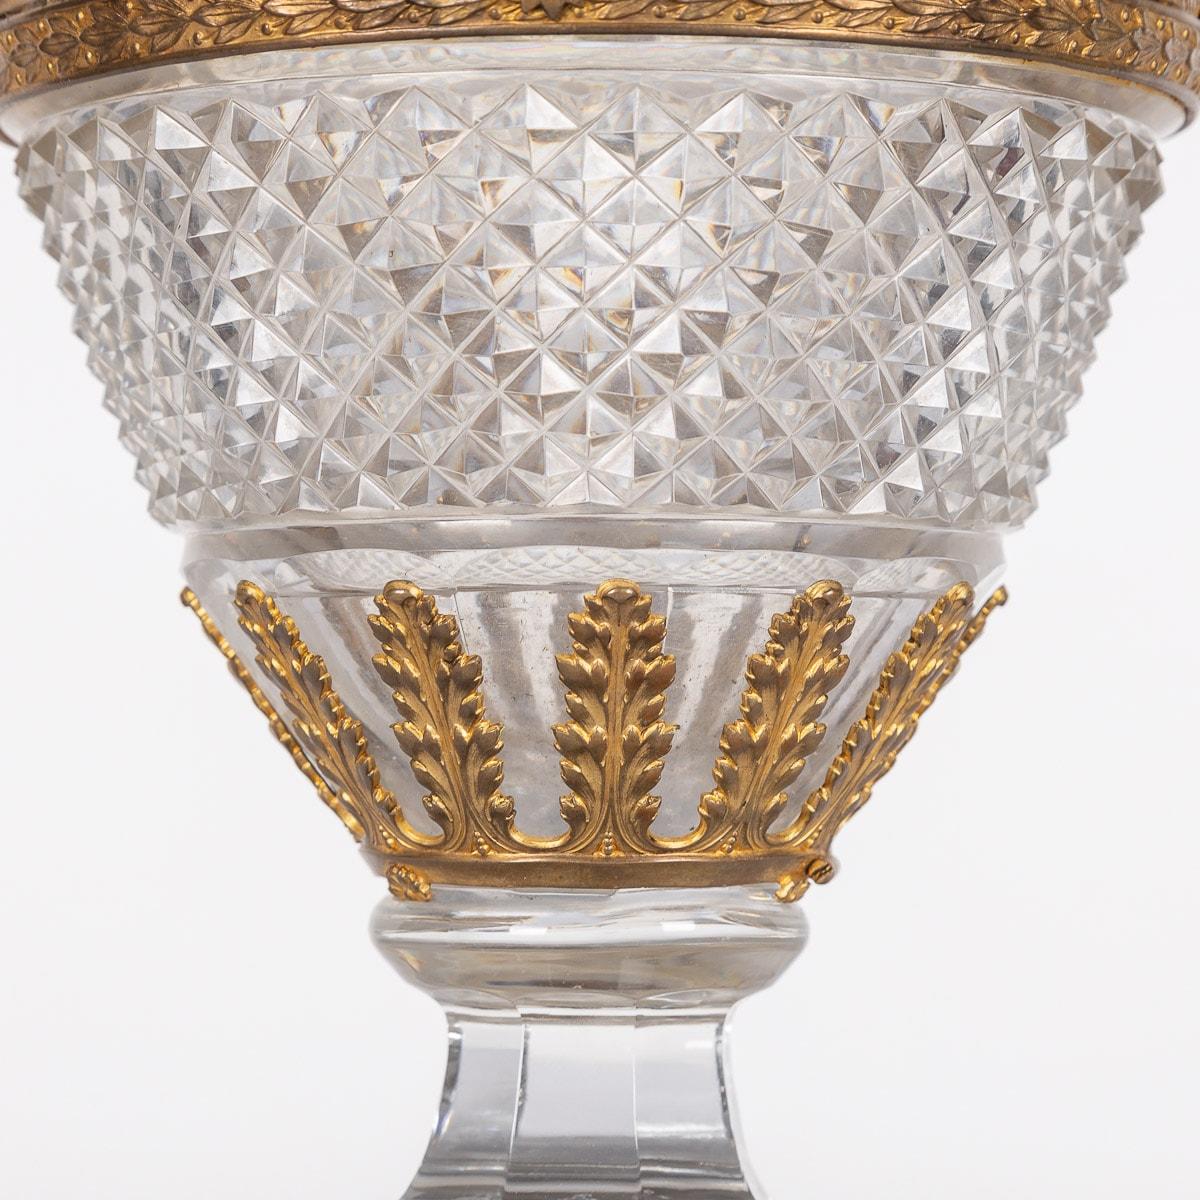 20th Century French Gold Plated & Baccarat Glass Vase, c.1900 For Sale 9